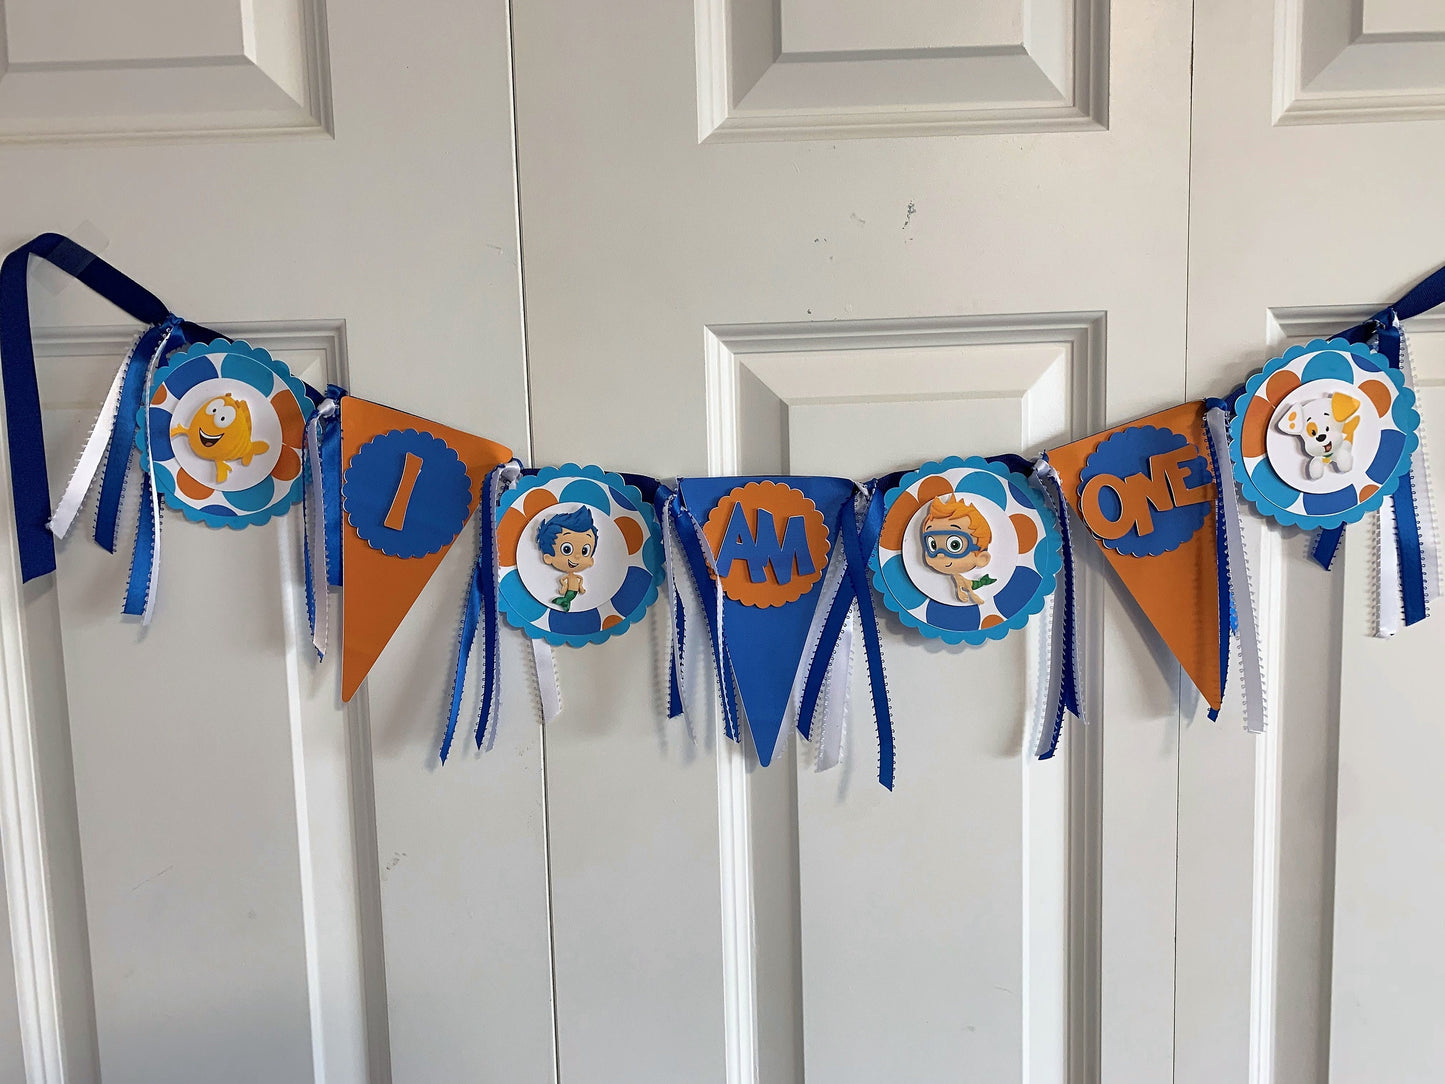 Bubble Guppies Highchair banner/I am one banner featuring Bubble Guppies